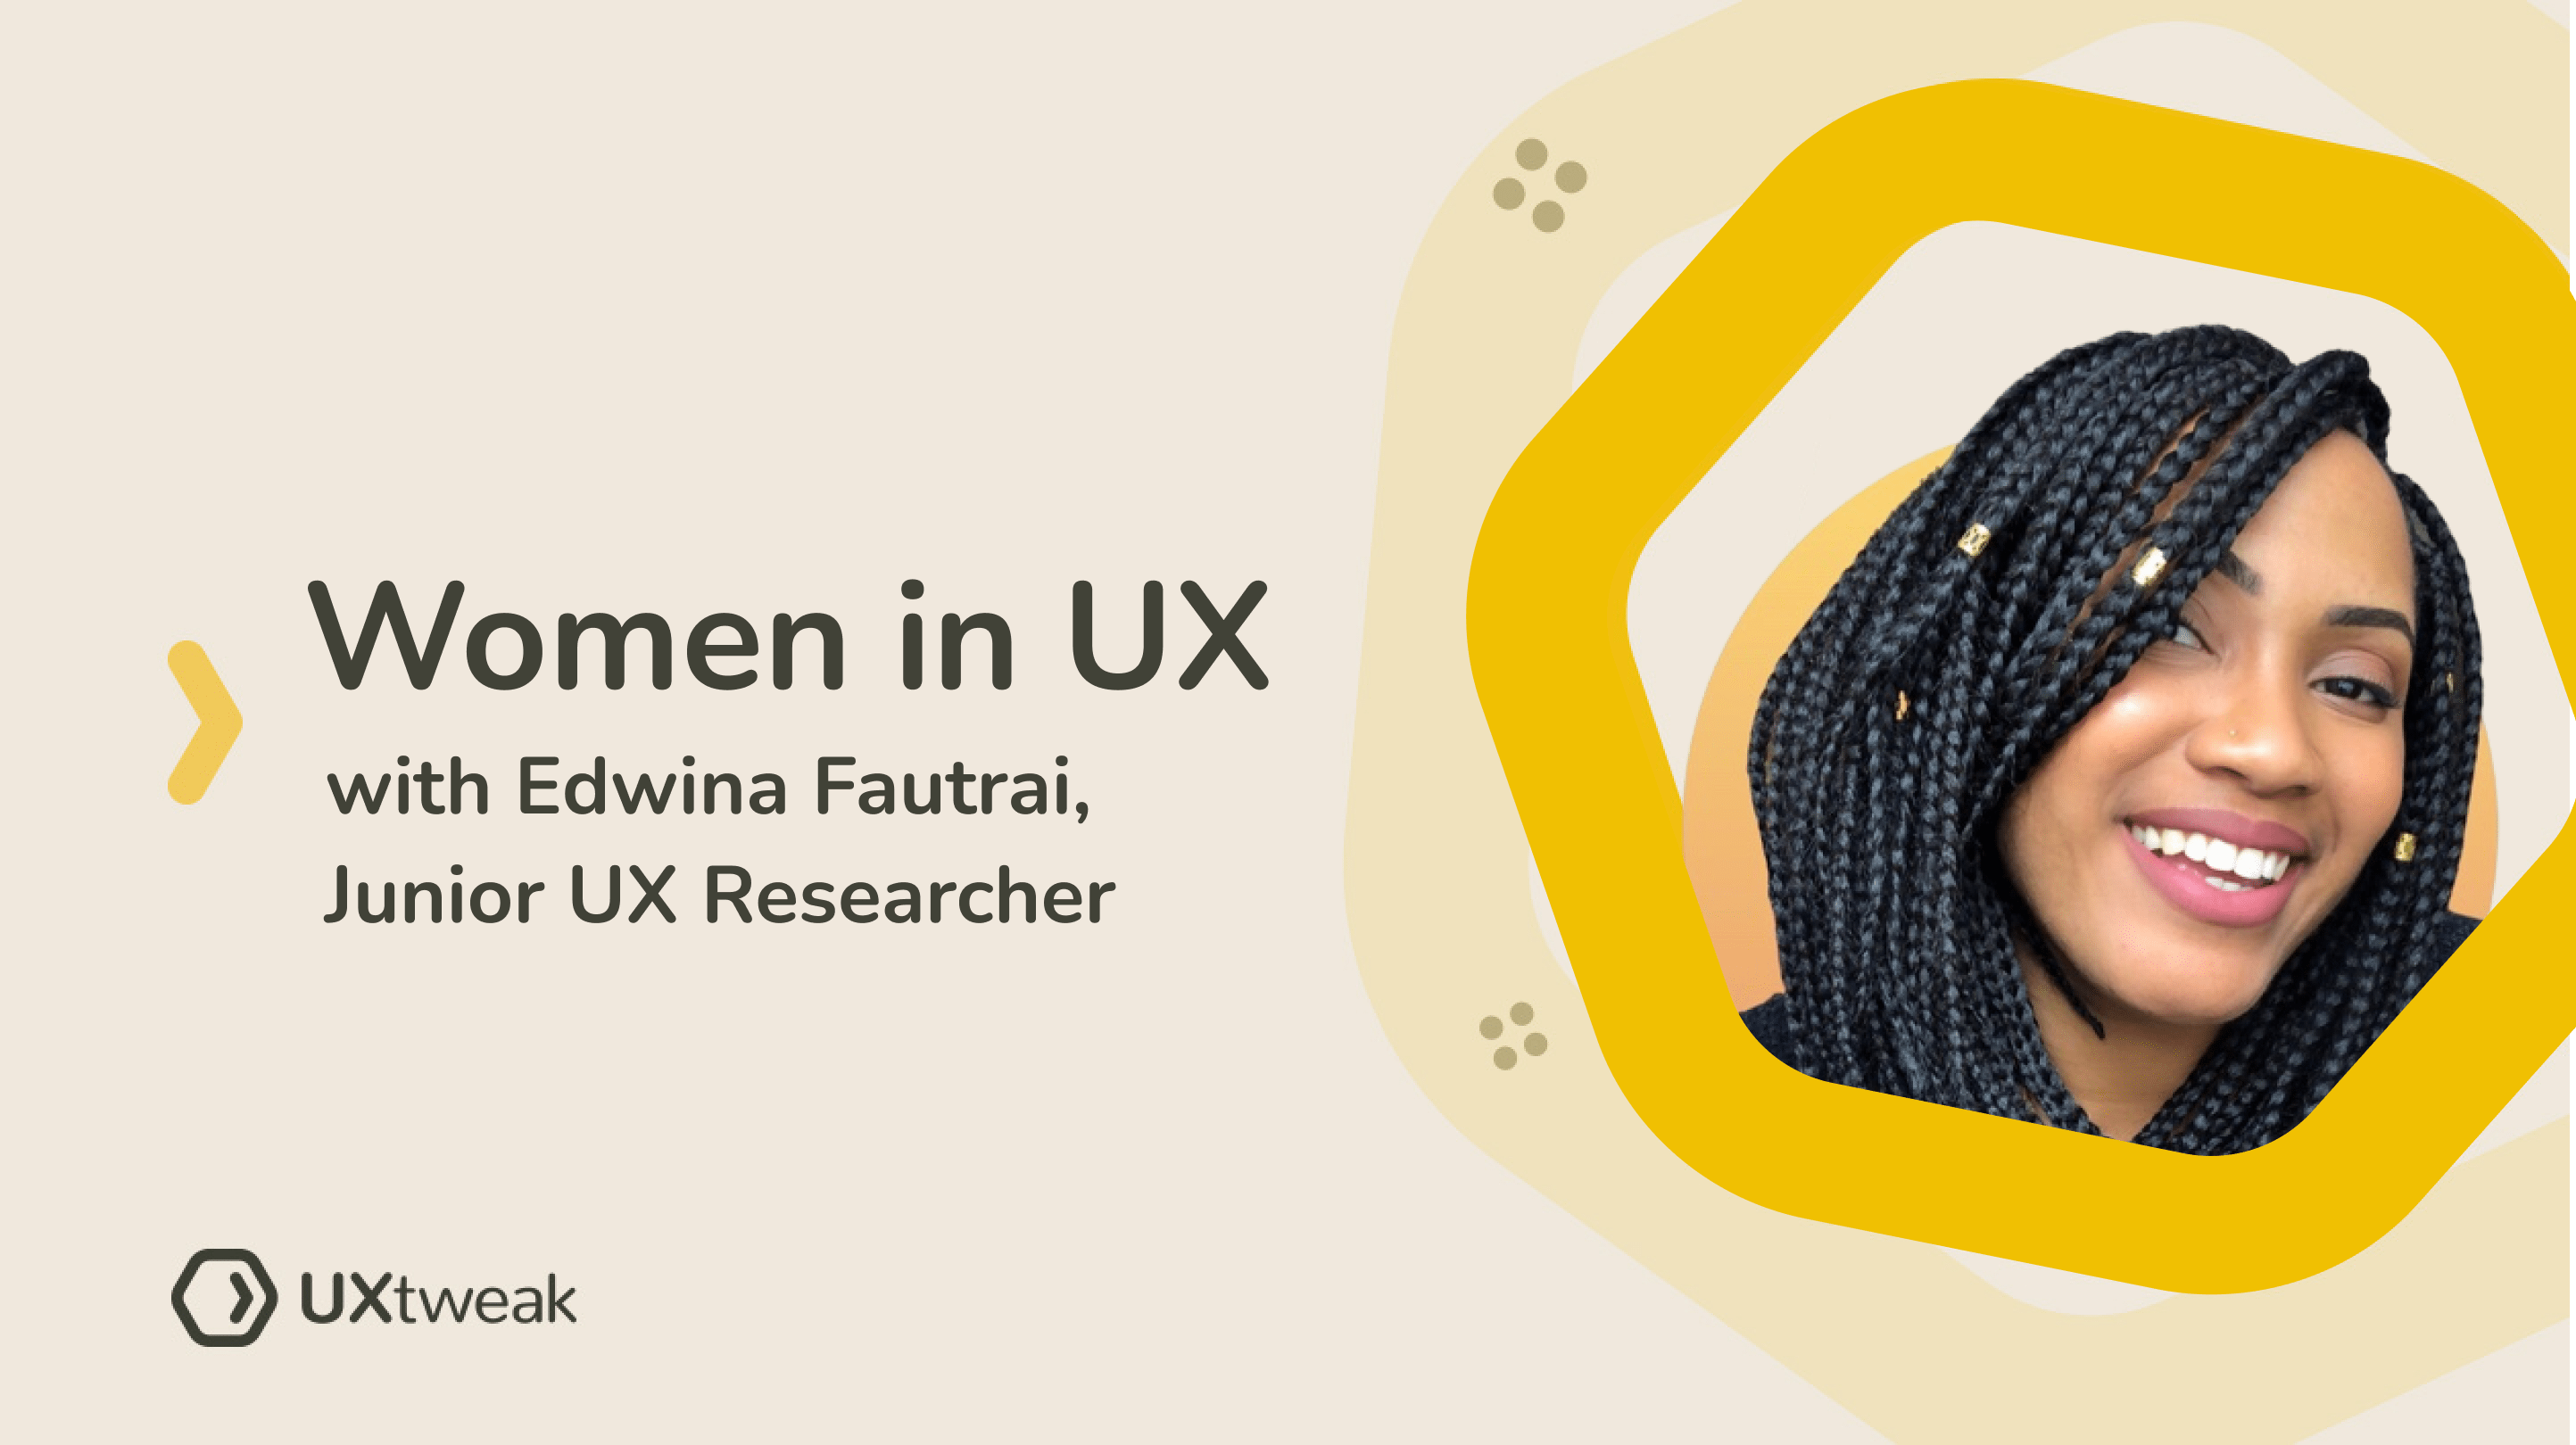 Women in UX: Edwina Fautrai about transitioning to UX